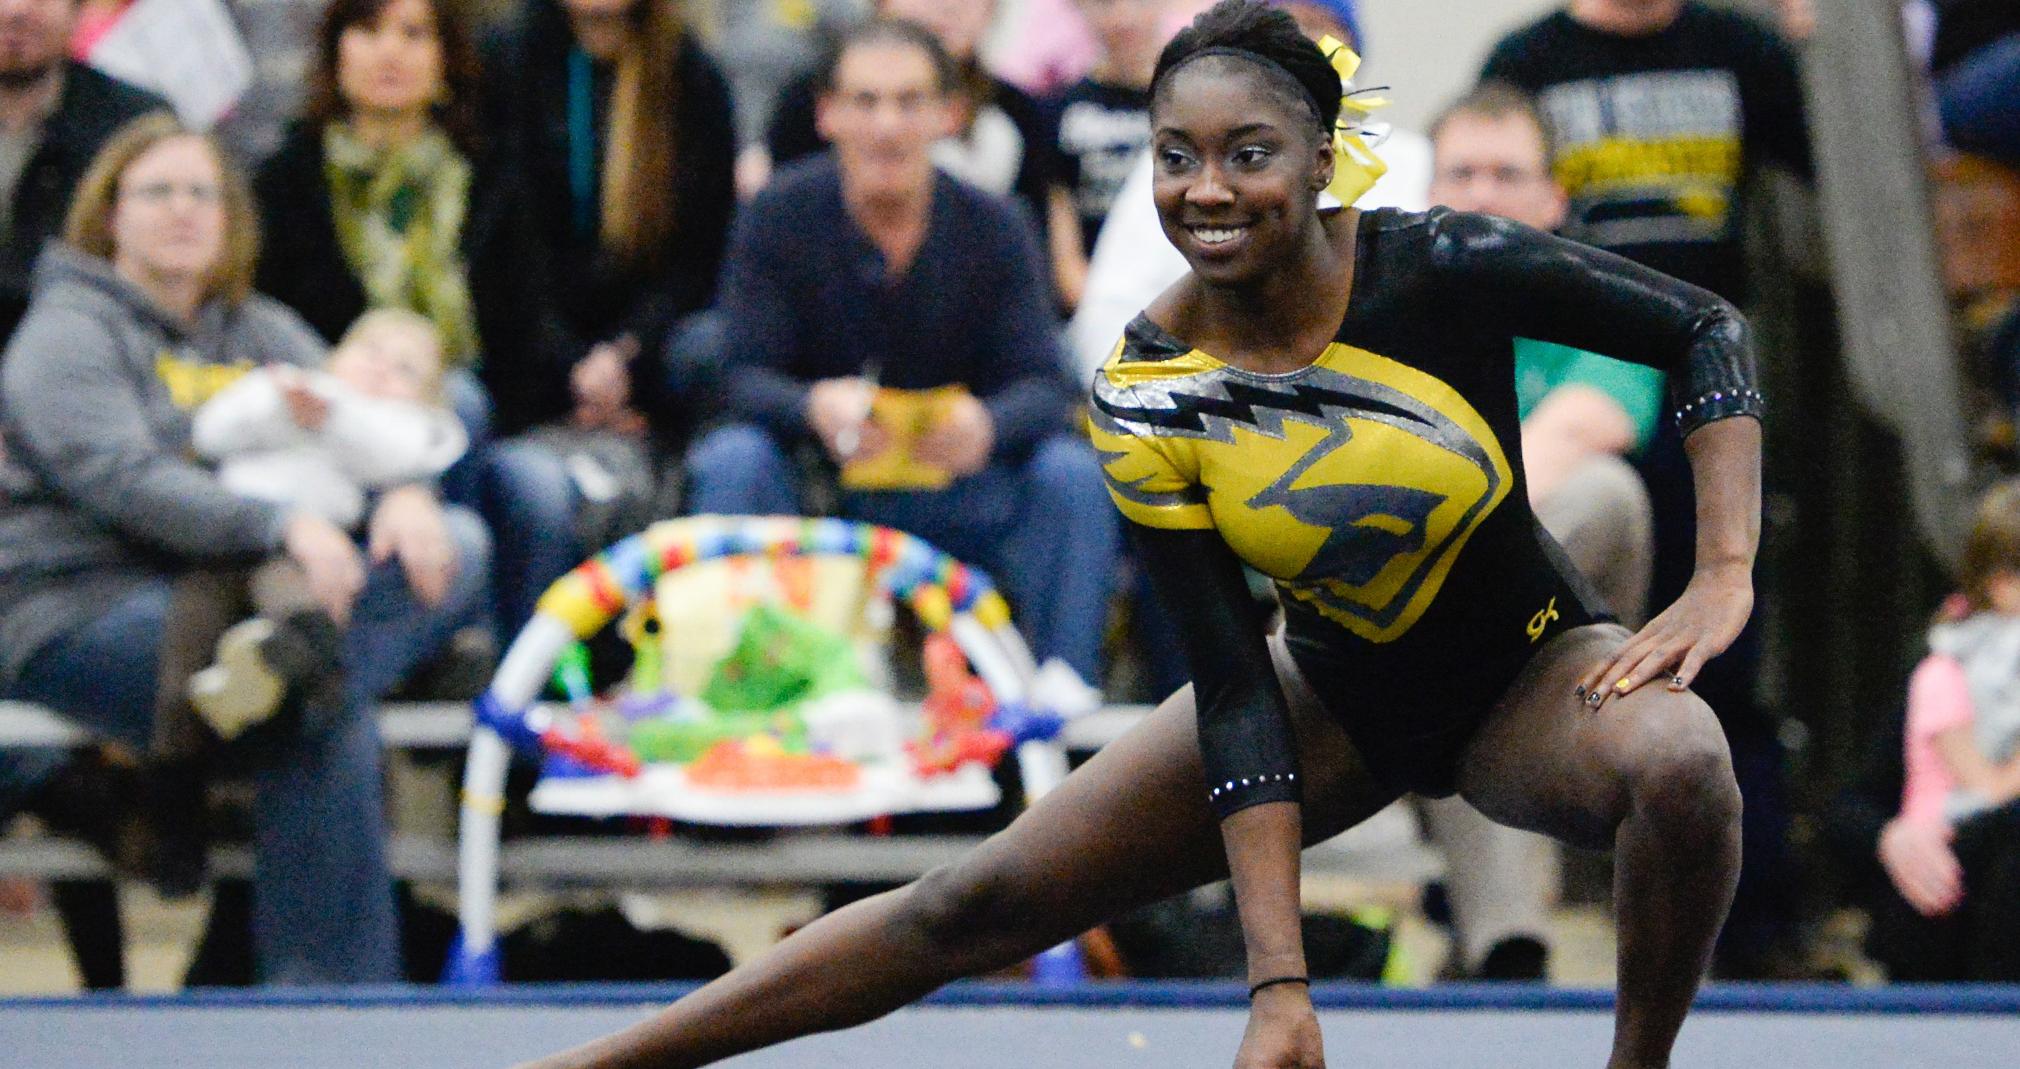 Danielle Turner finished sixth in the floor exercise while placing 15th on the balance beam.